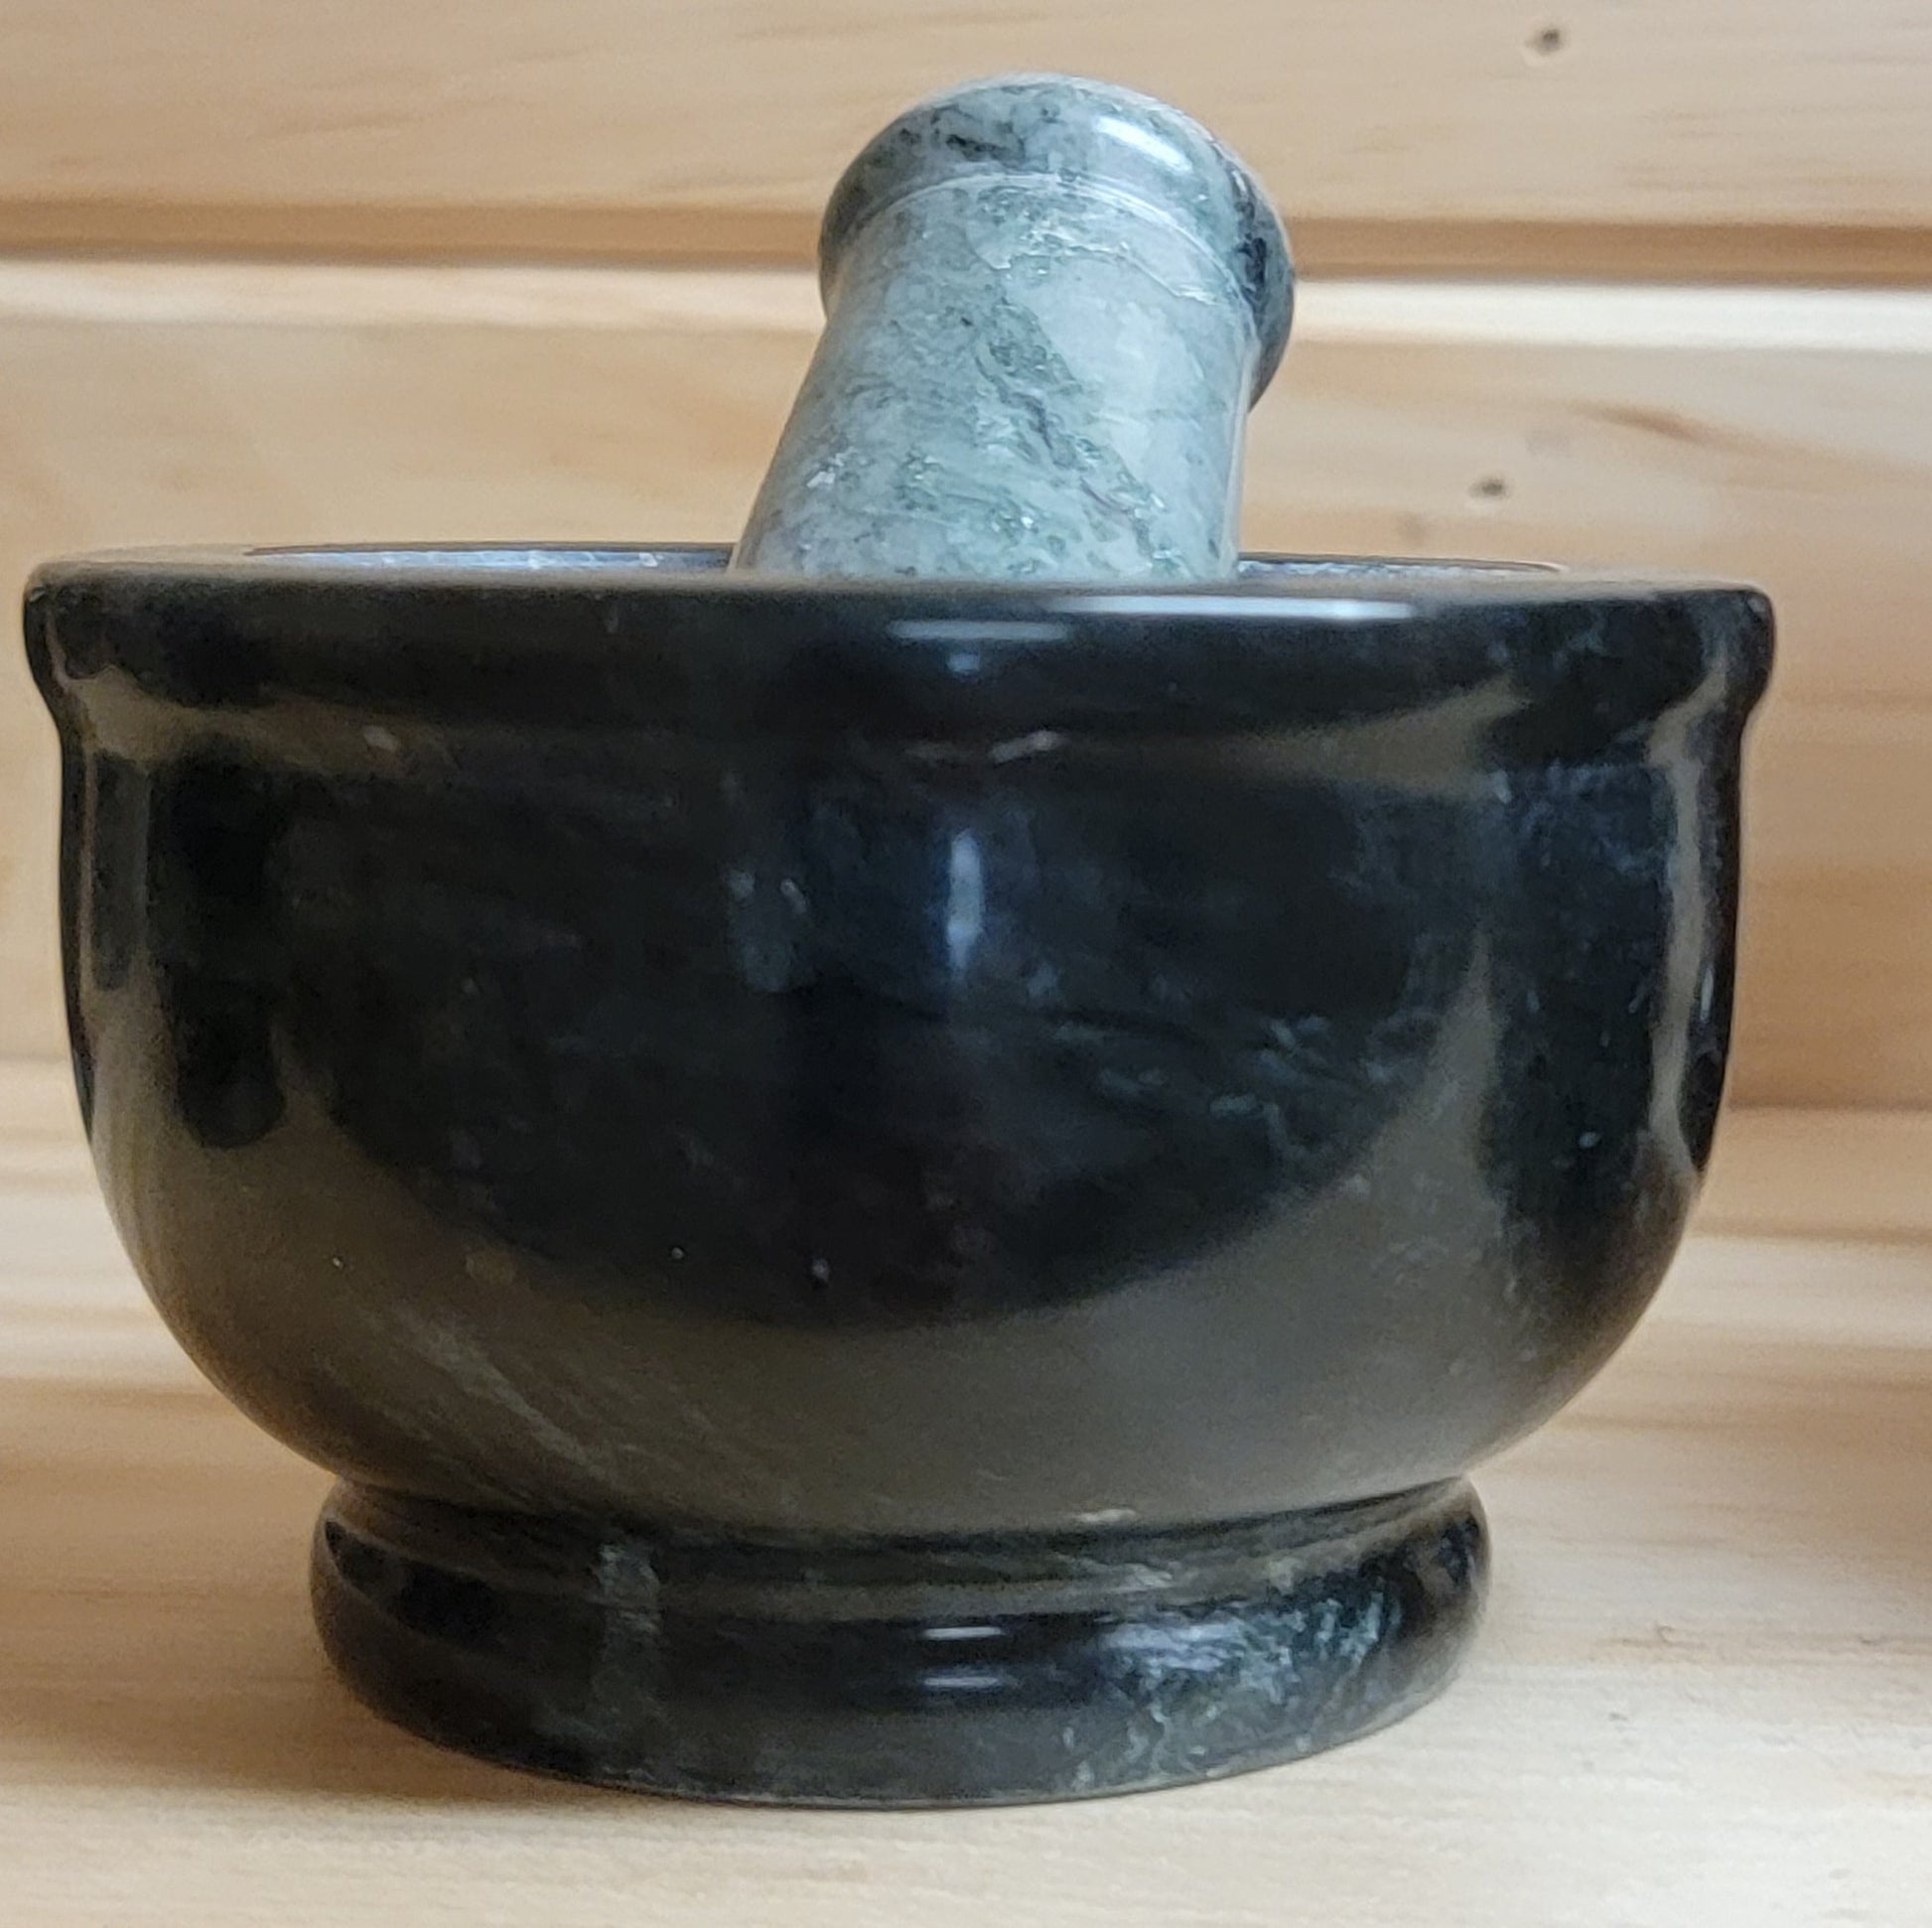 Mortar & Pestle 4 Inch Green Marble